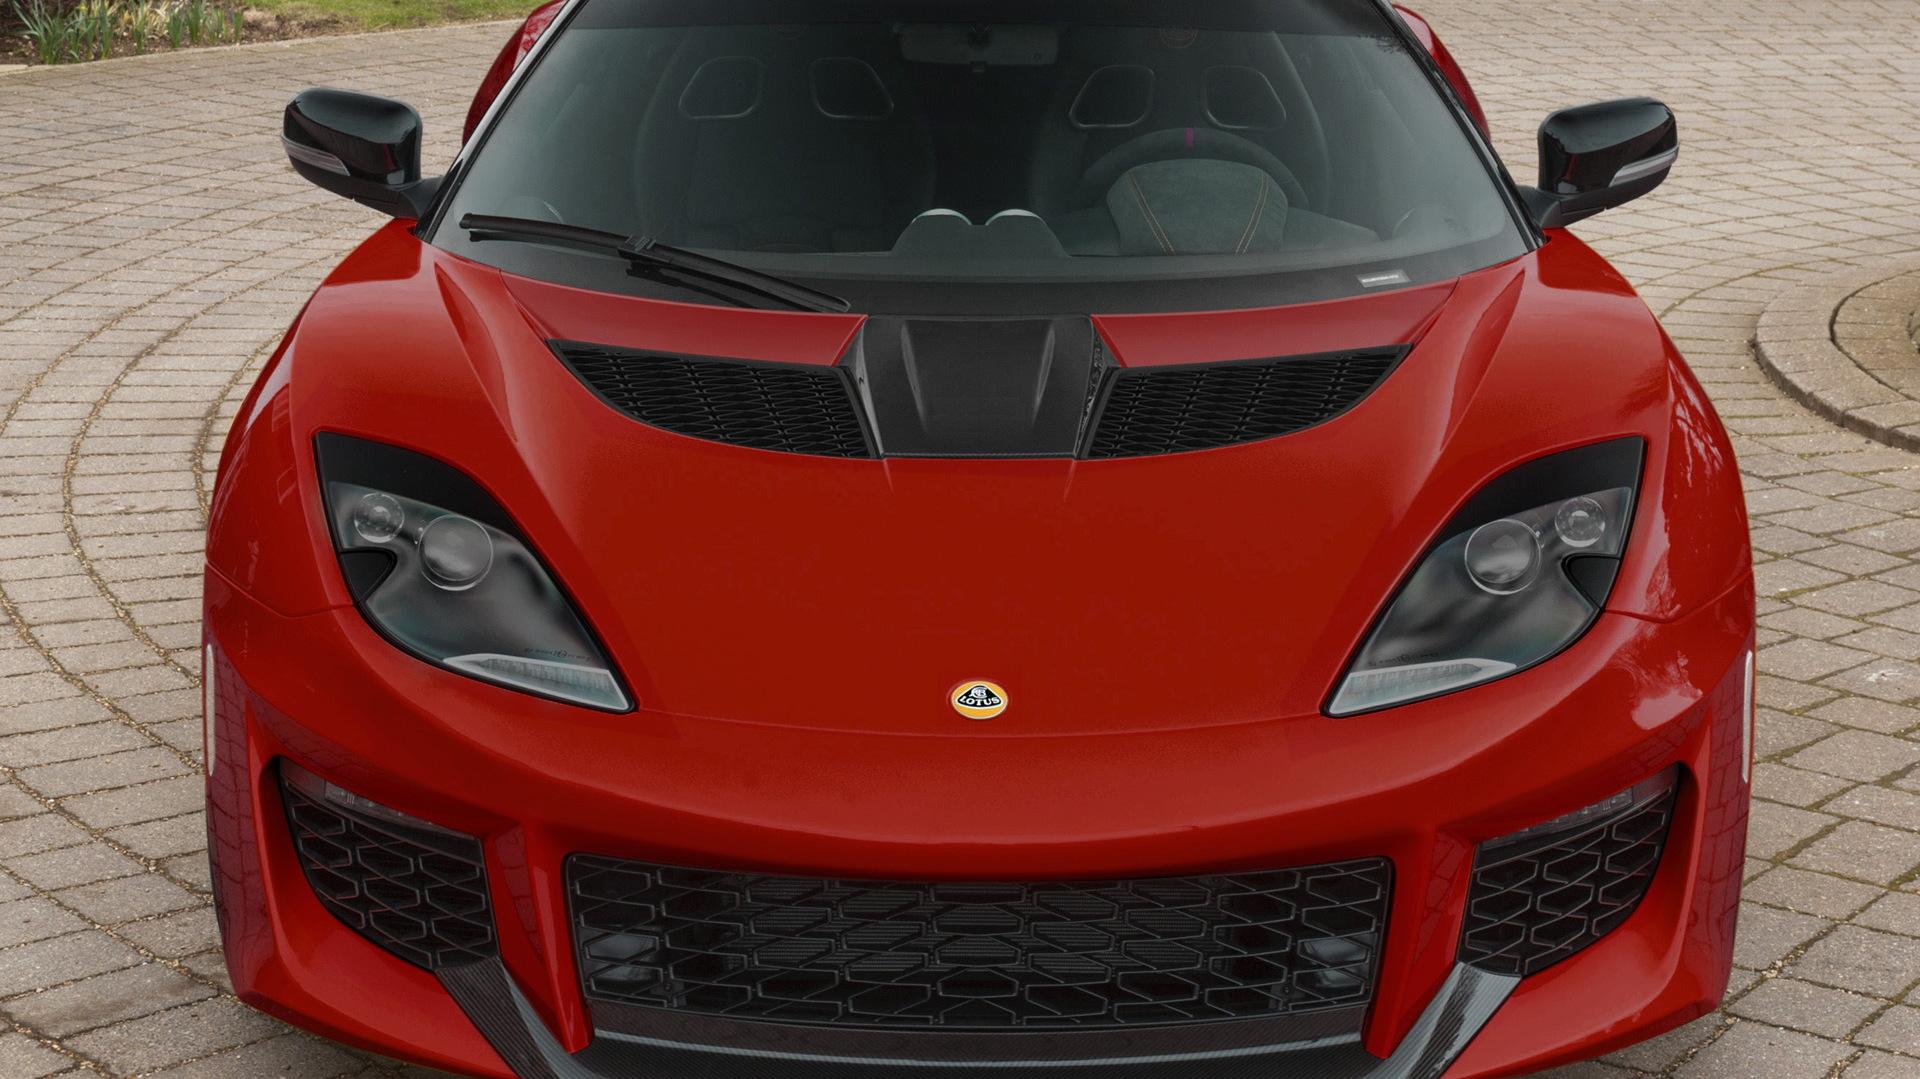 Lotus Evora Lightweight Options Drop Curb Weight To Pounds